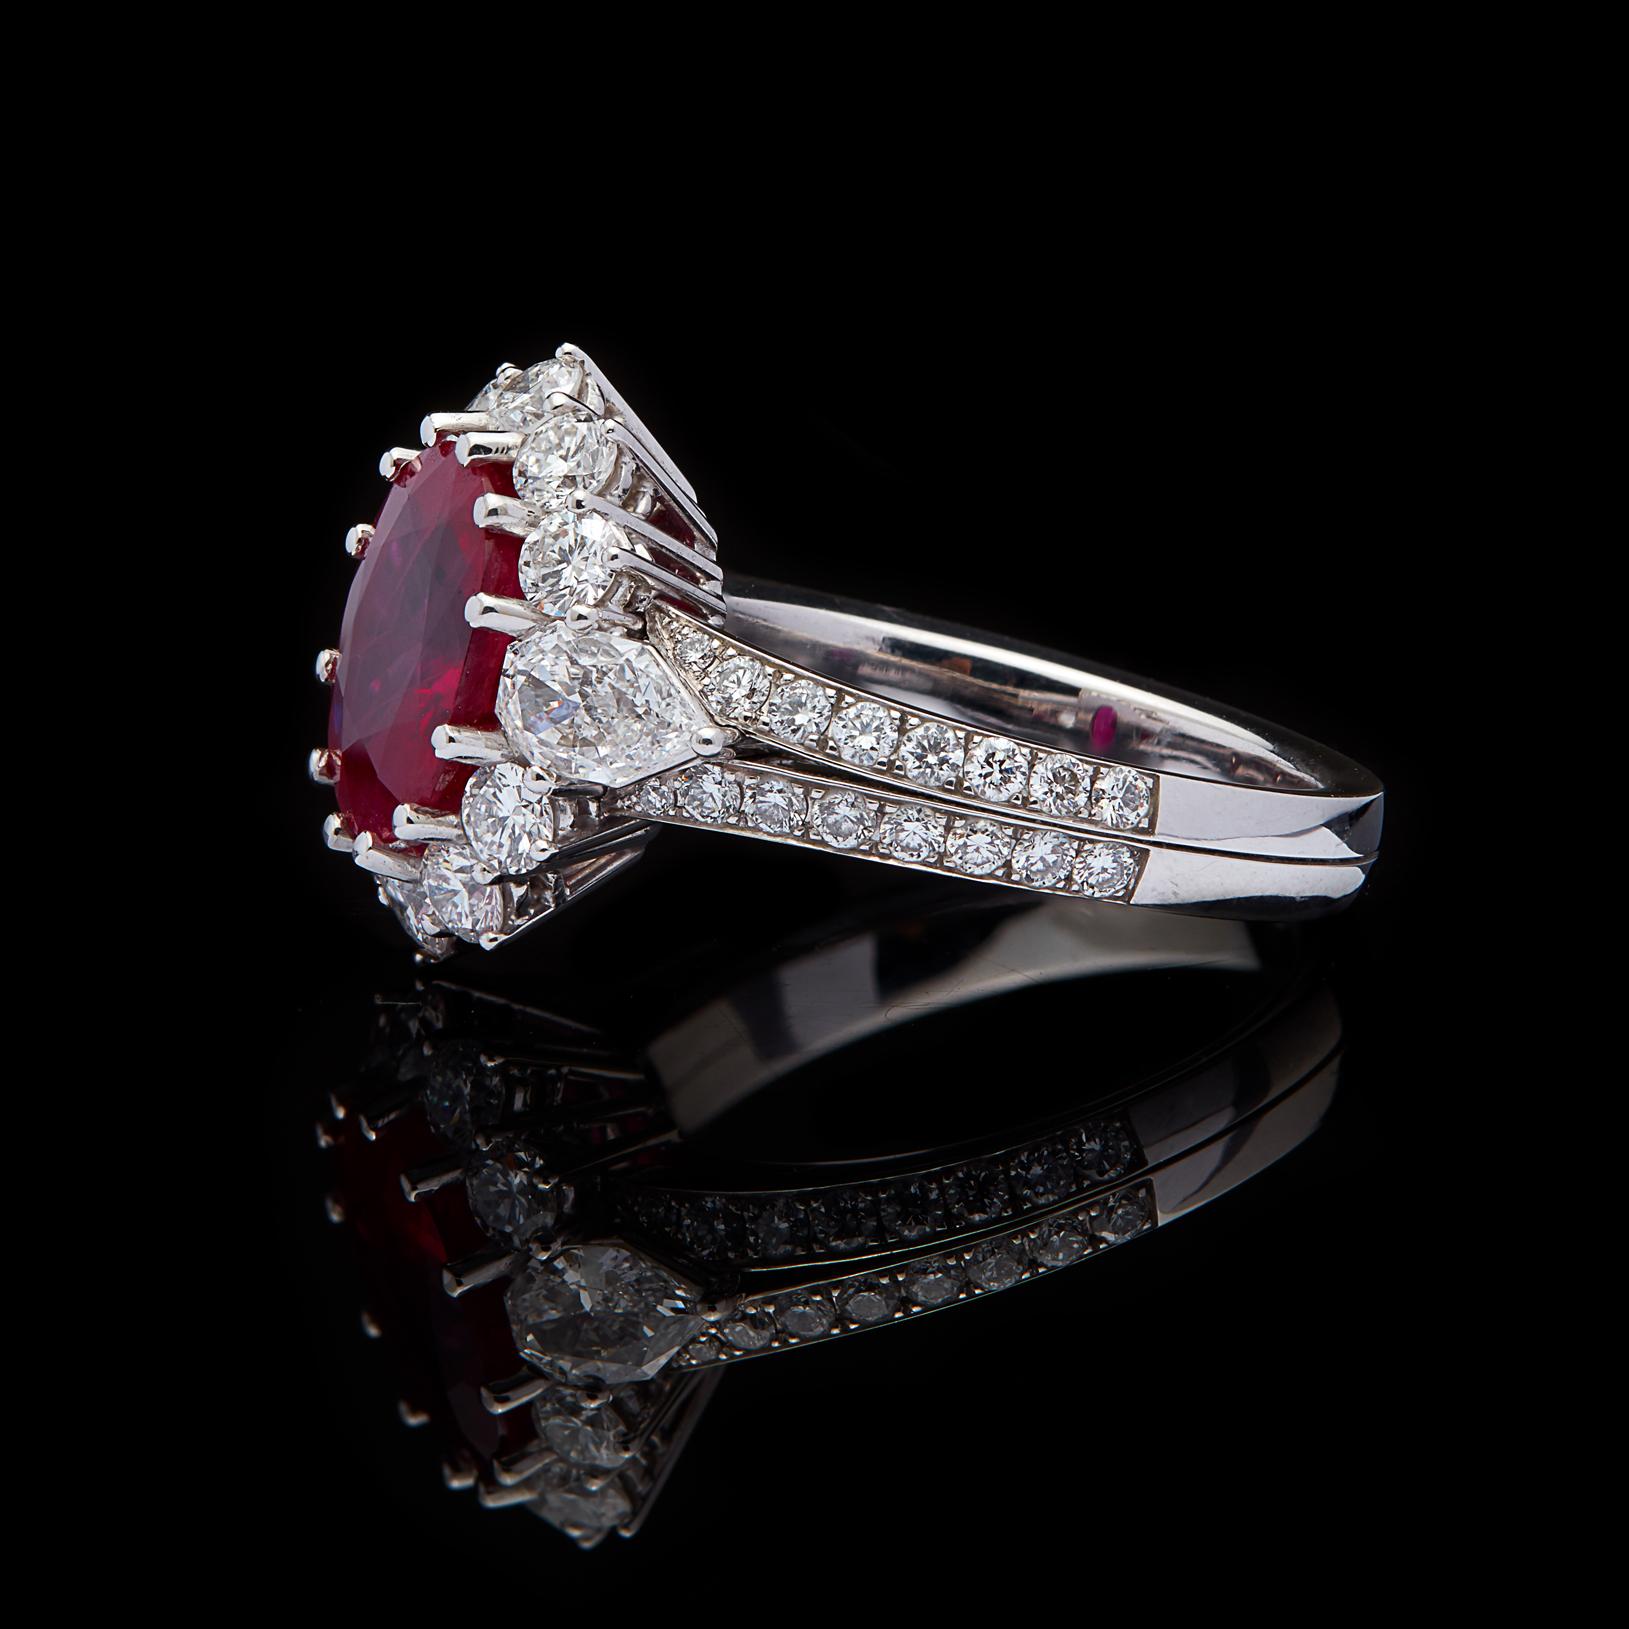 Oval Cut Gorgeous GIA 3.06 Carat Burma Ruby and Diamond Ring For Sale